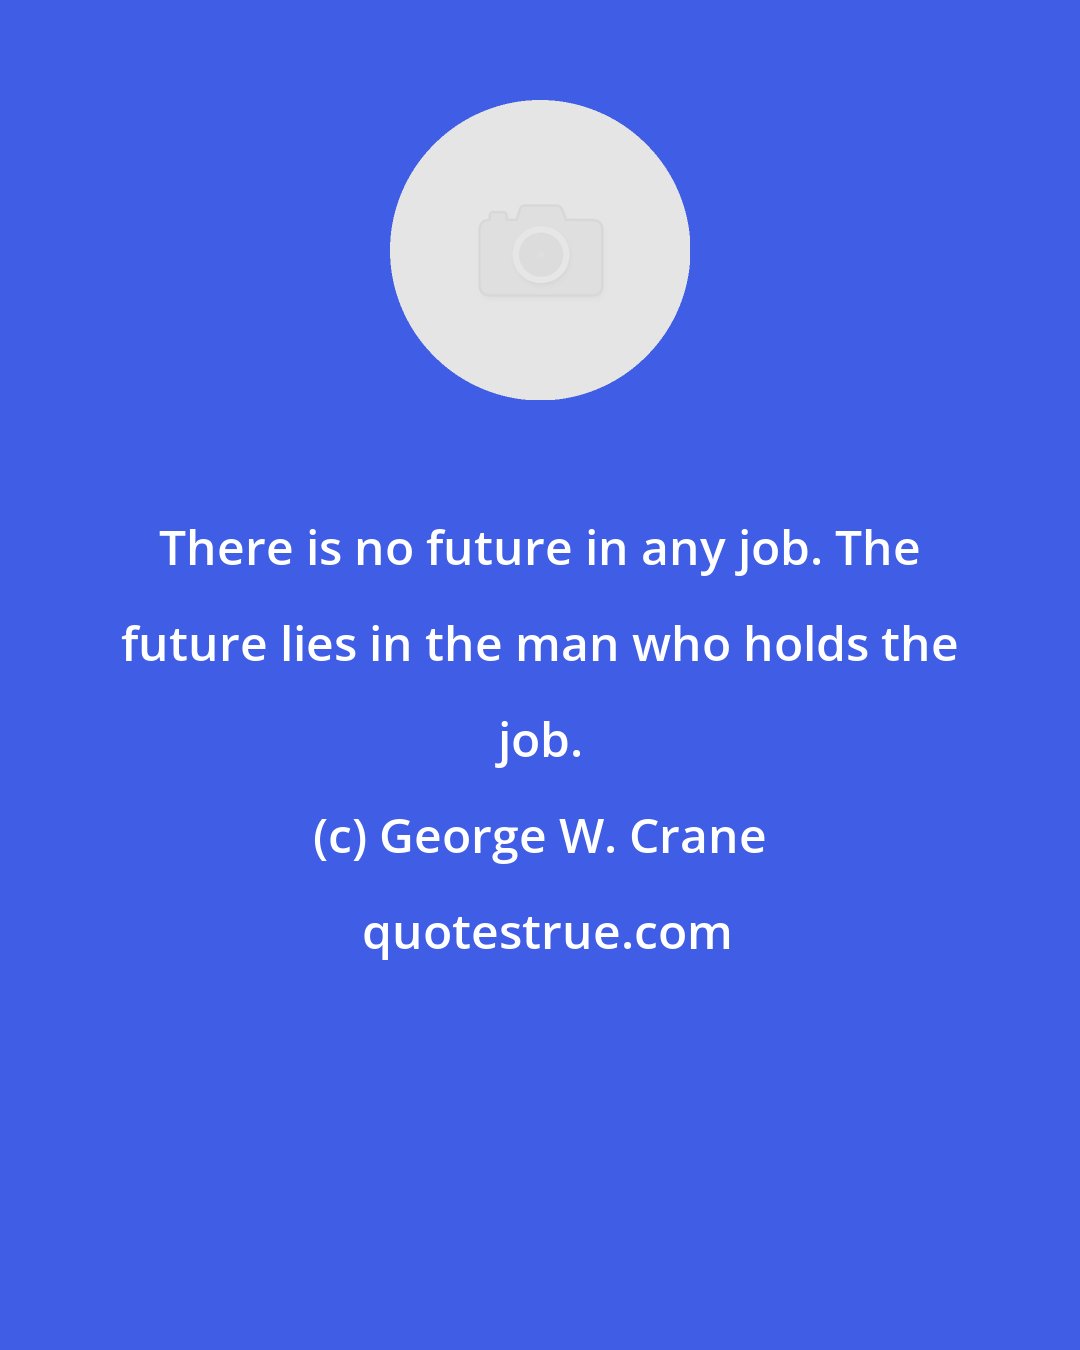 George W. Crane: There is no future in any job. The future lies in the man who holds the job.